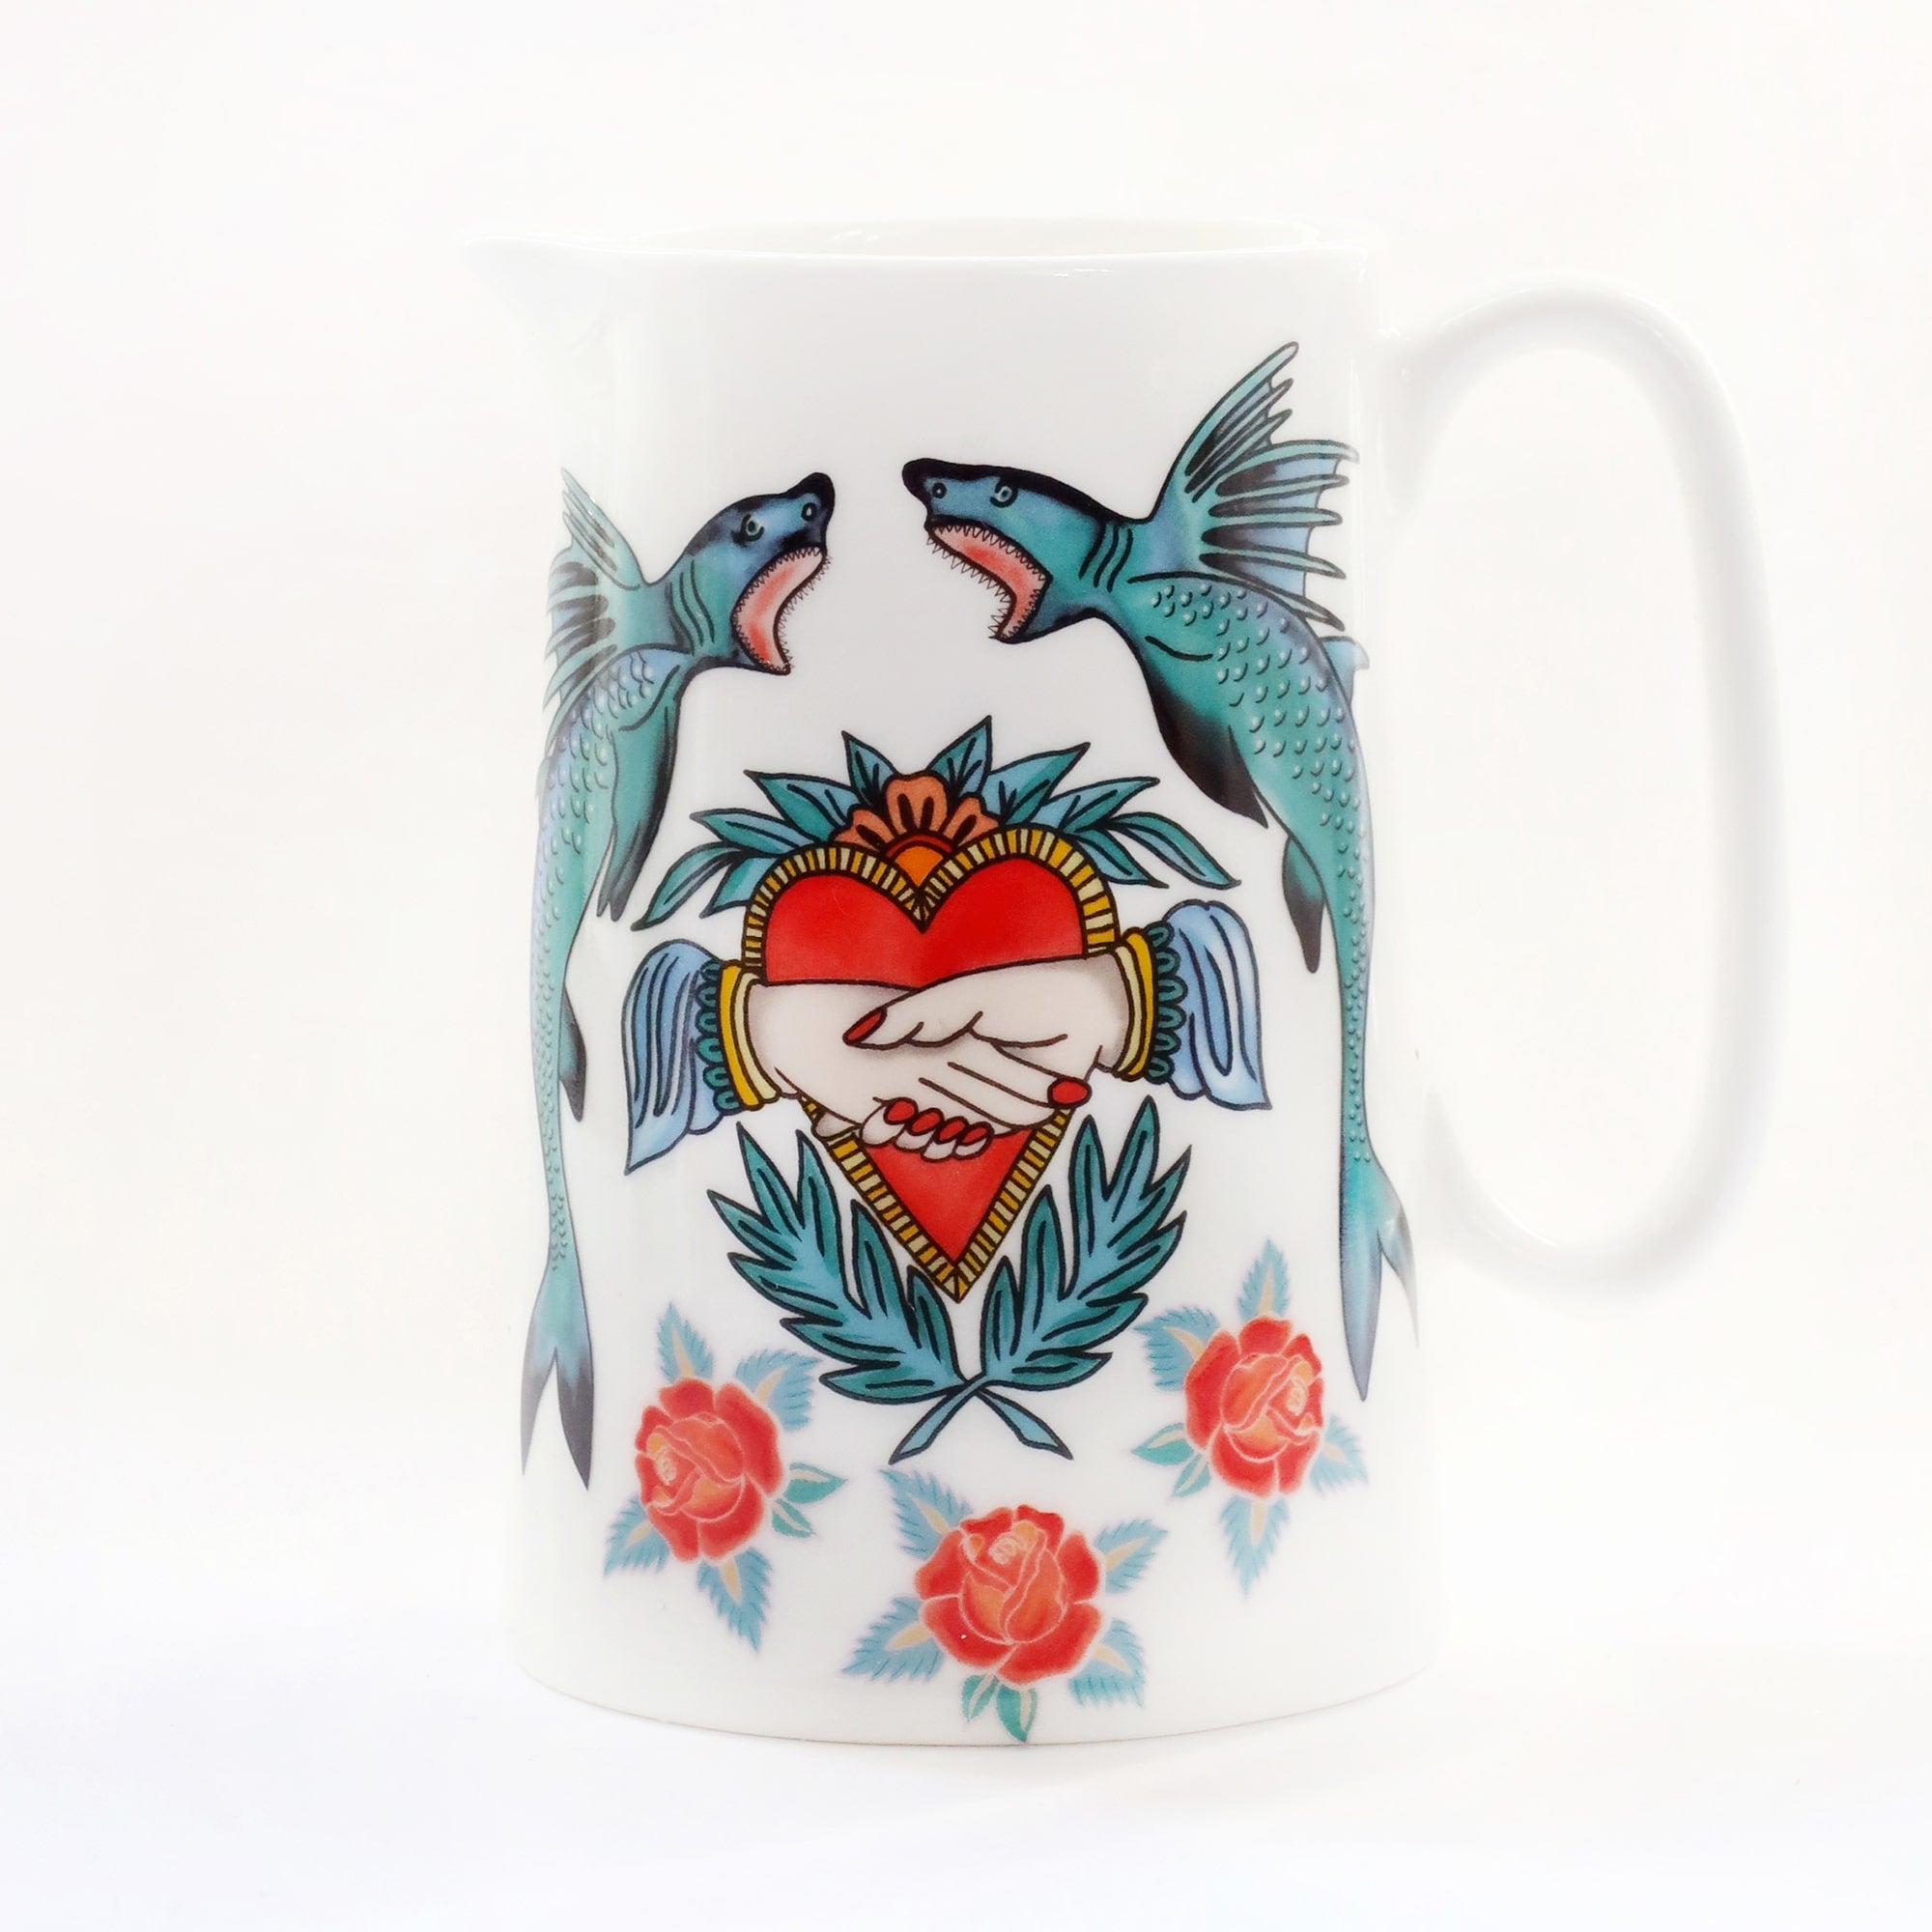 White bone china jug with brightly coloured tattoo inspired design of sharks and hearts.